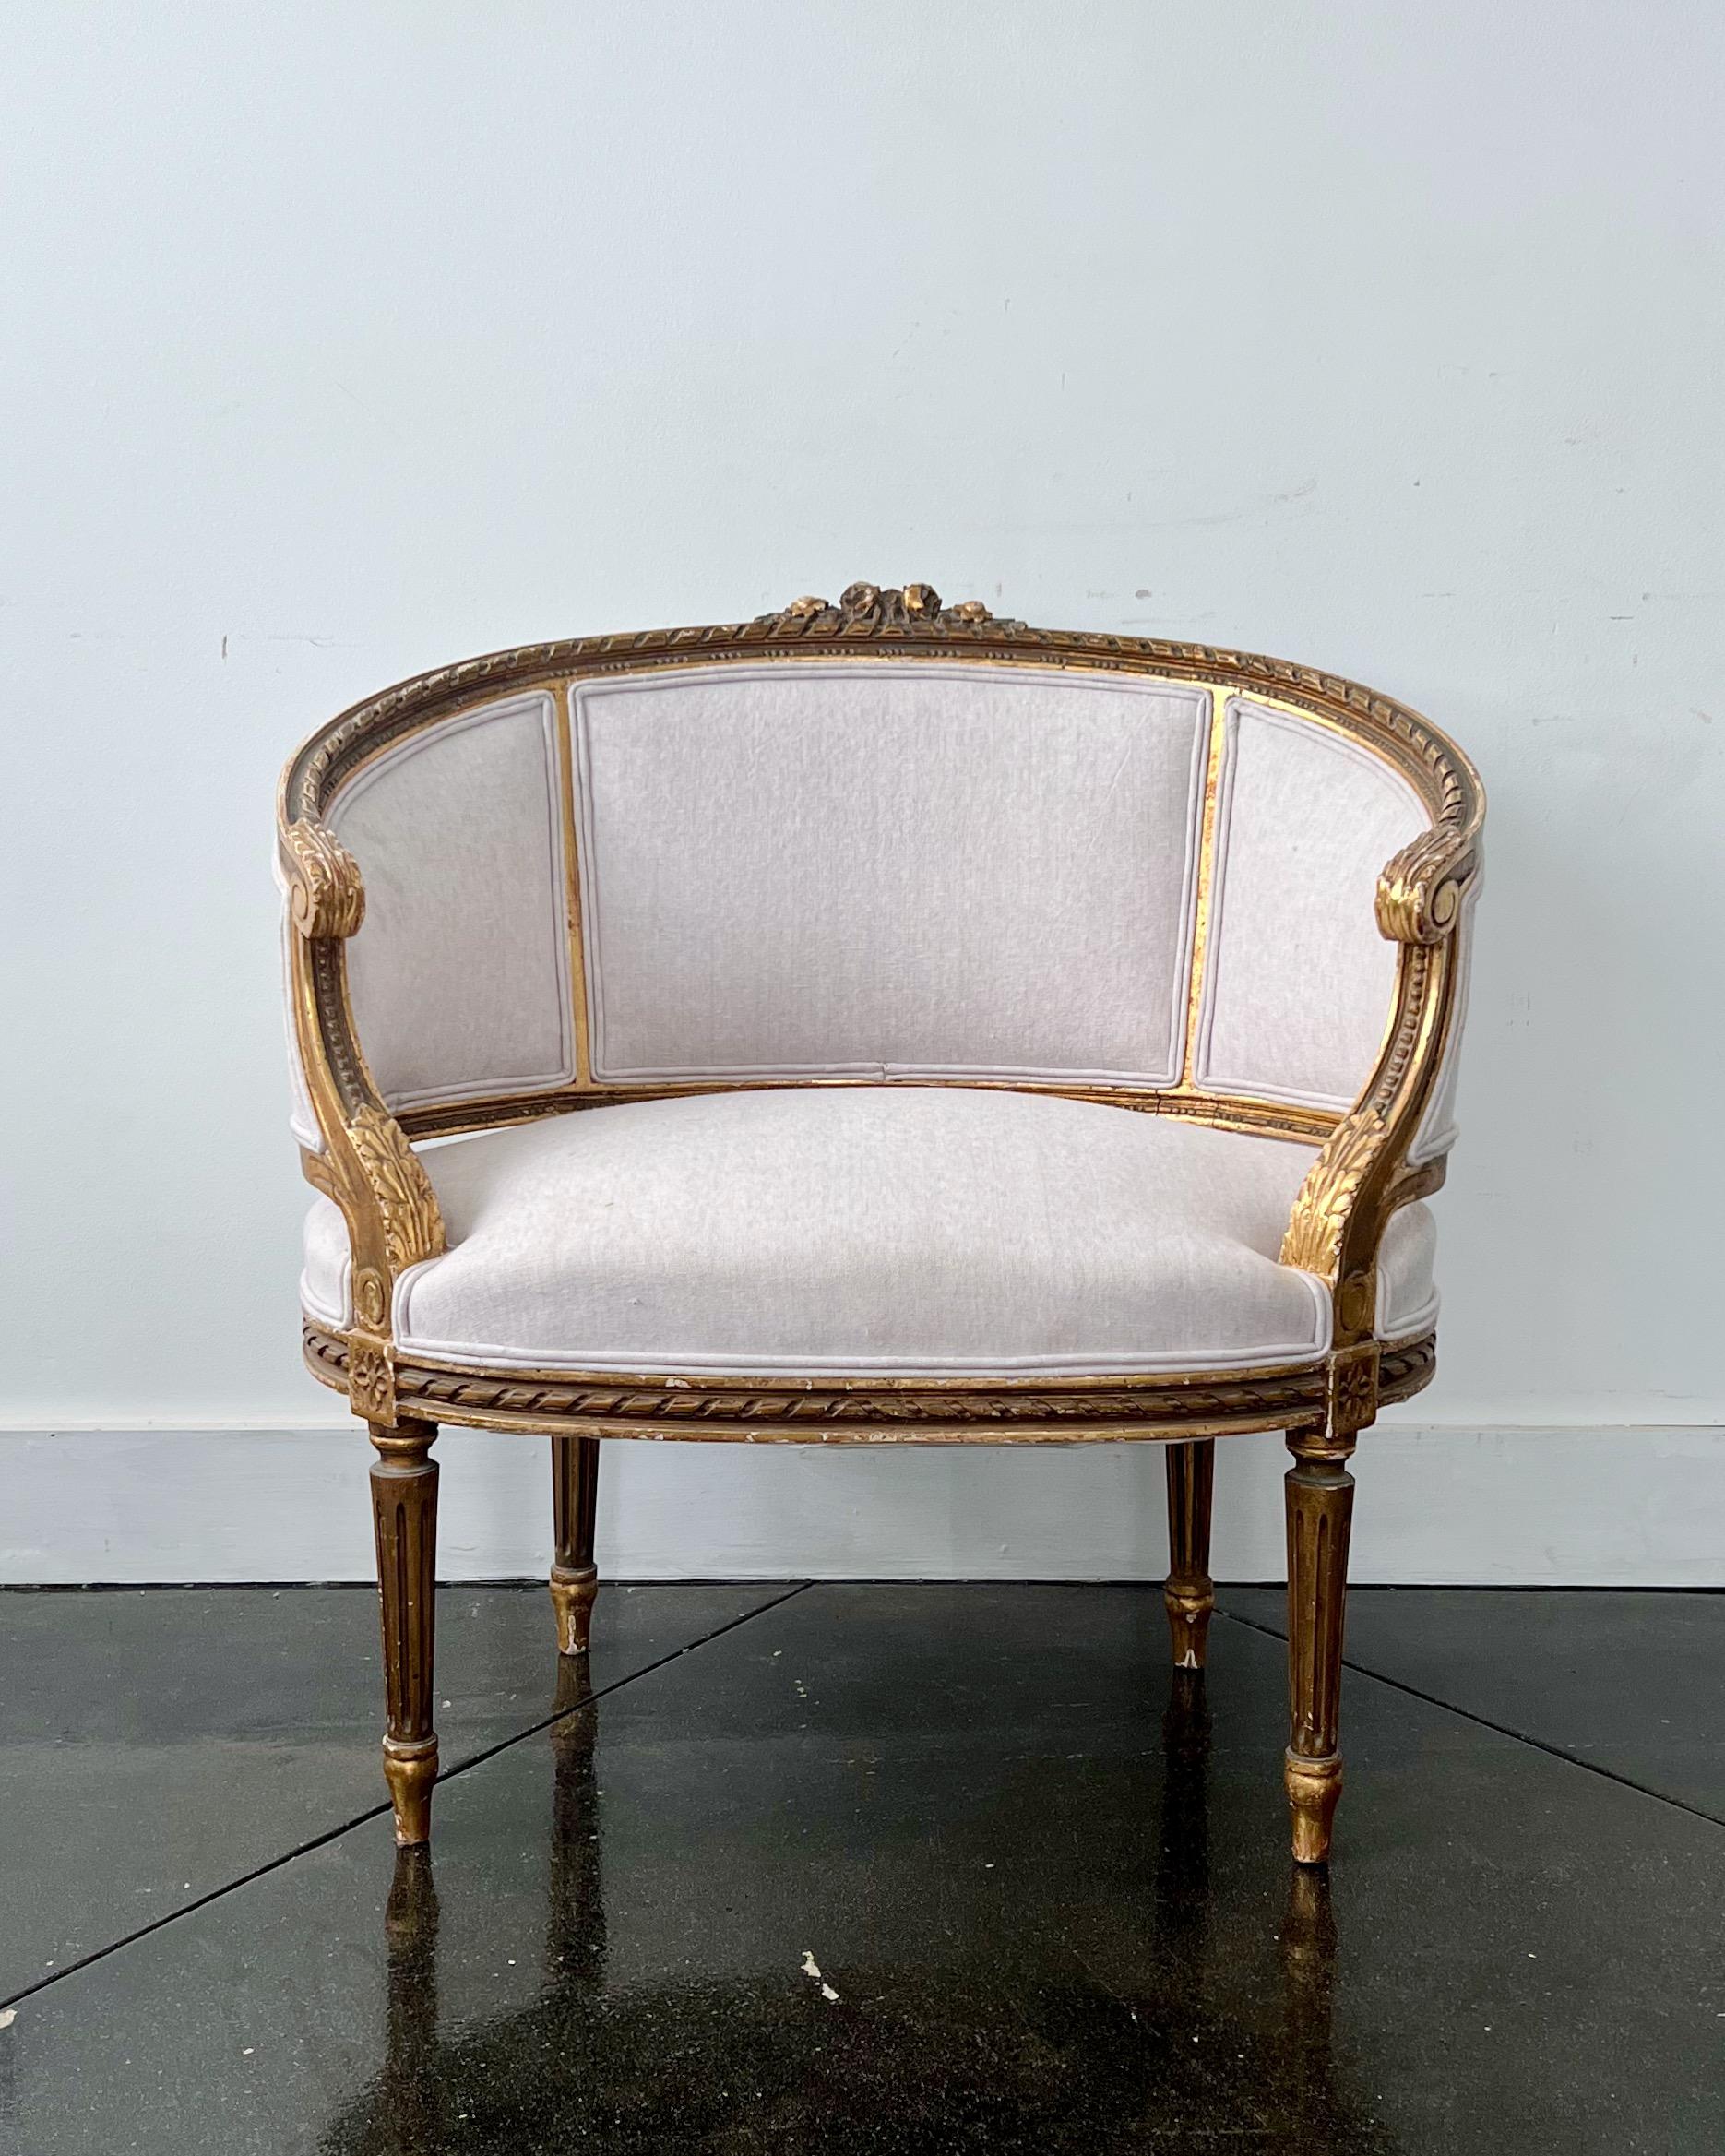 19th century French very wide and rare Bergère, Louis XVI style, called Marquise with coved back which sweep without a break in to the armrests. Richly carved back and seat rails on elegant fluted legs with flower carvings. Upholstered beautifully